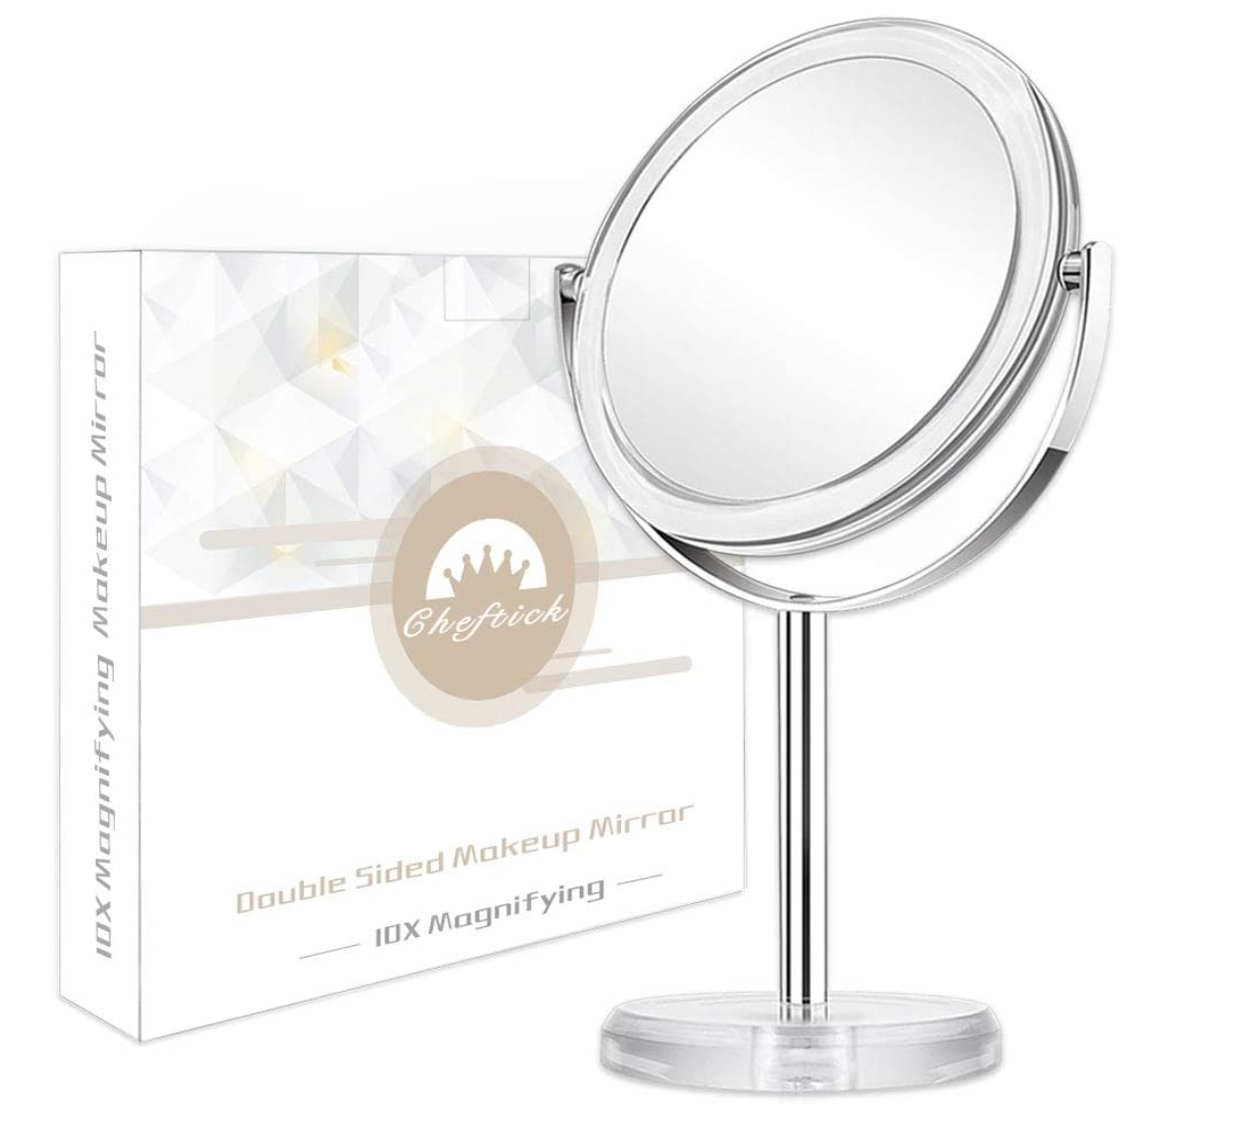 Cheftick Double Sided Tabletop Magnifying Makeup Mirror at Amazon